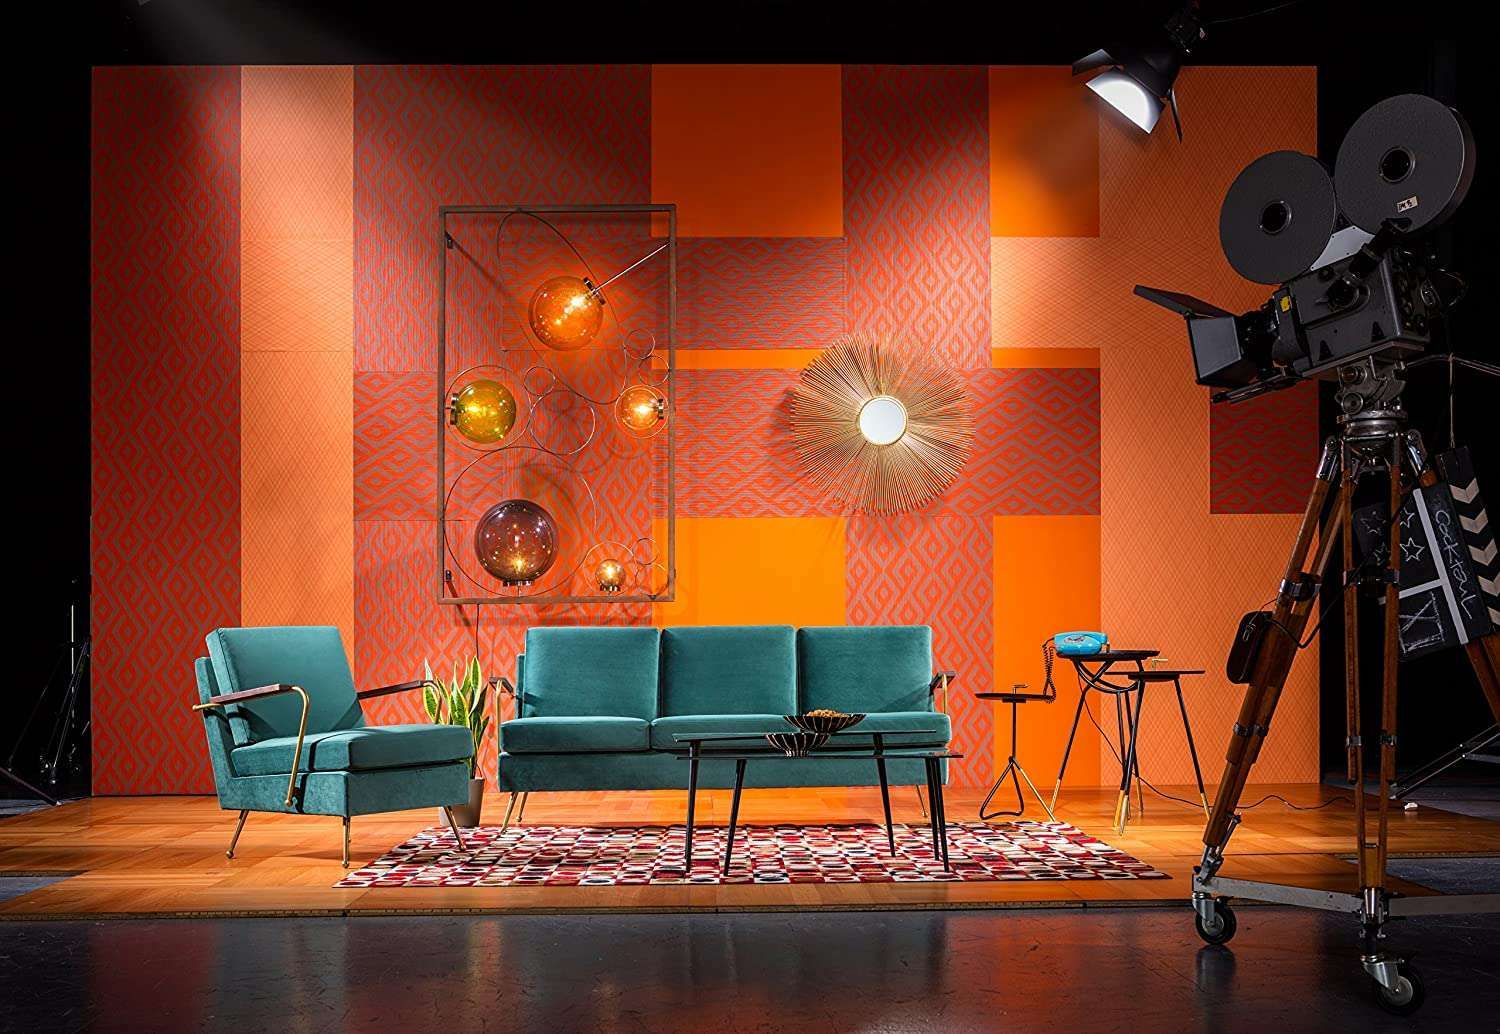 Mirrors Press profile homify غرفة المعيشة Furniture, Couch, Stage is empty, Orange, Chair, Interior design, Entertainment, Tripod, Table, Performing arts